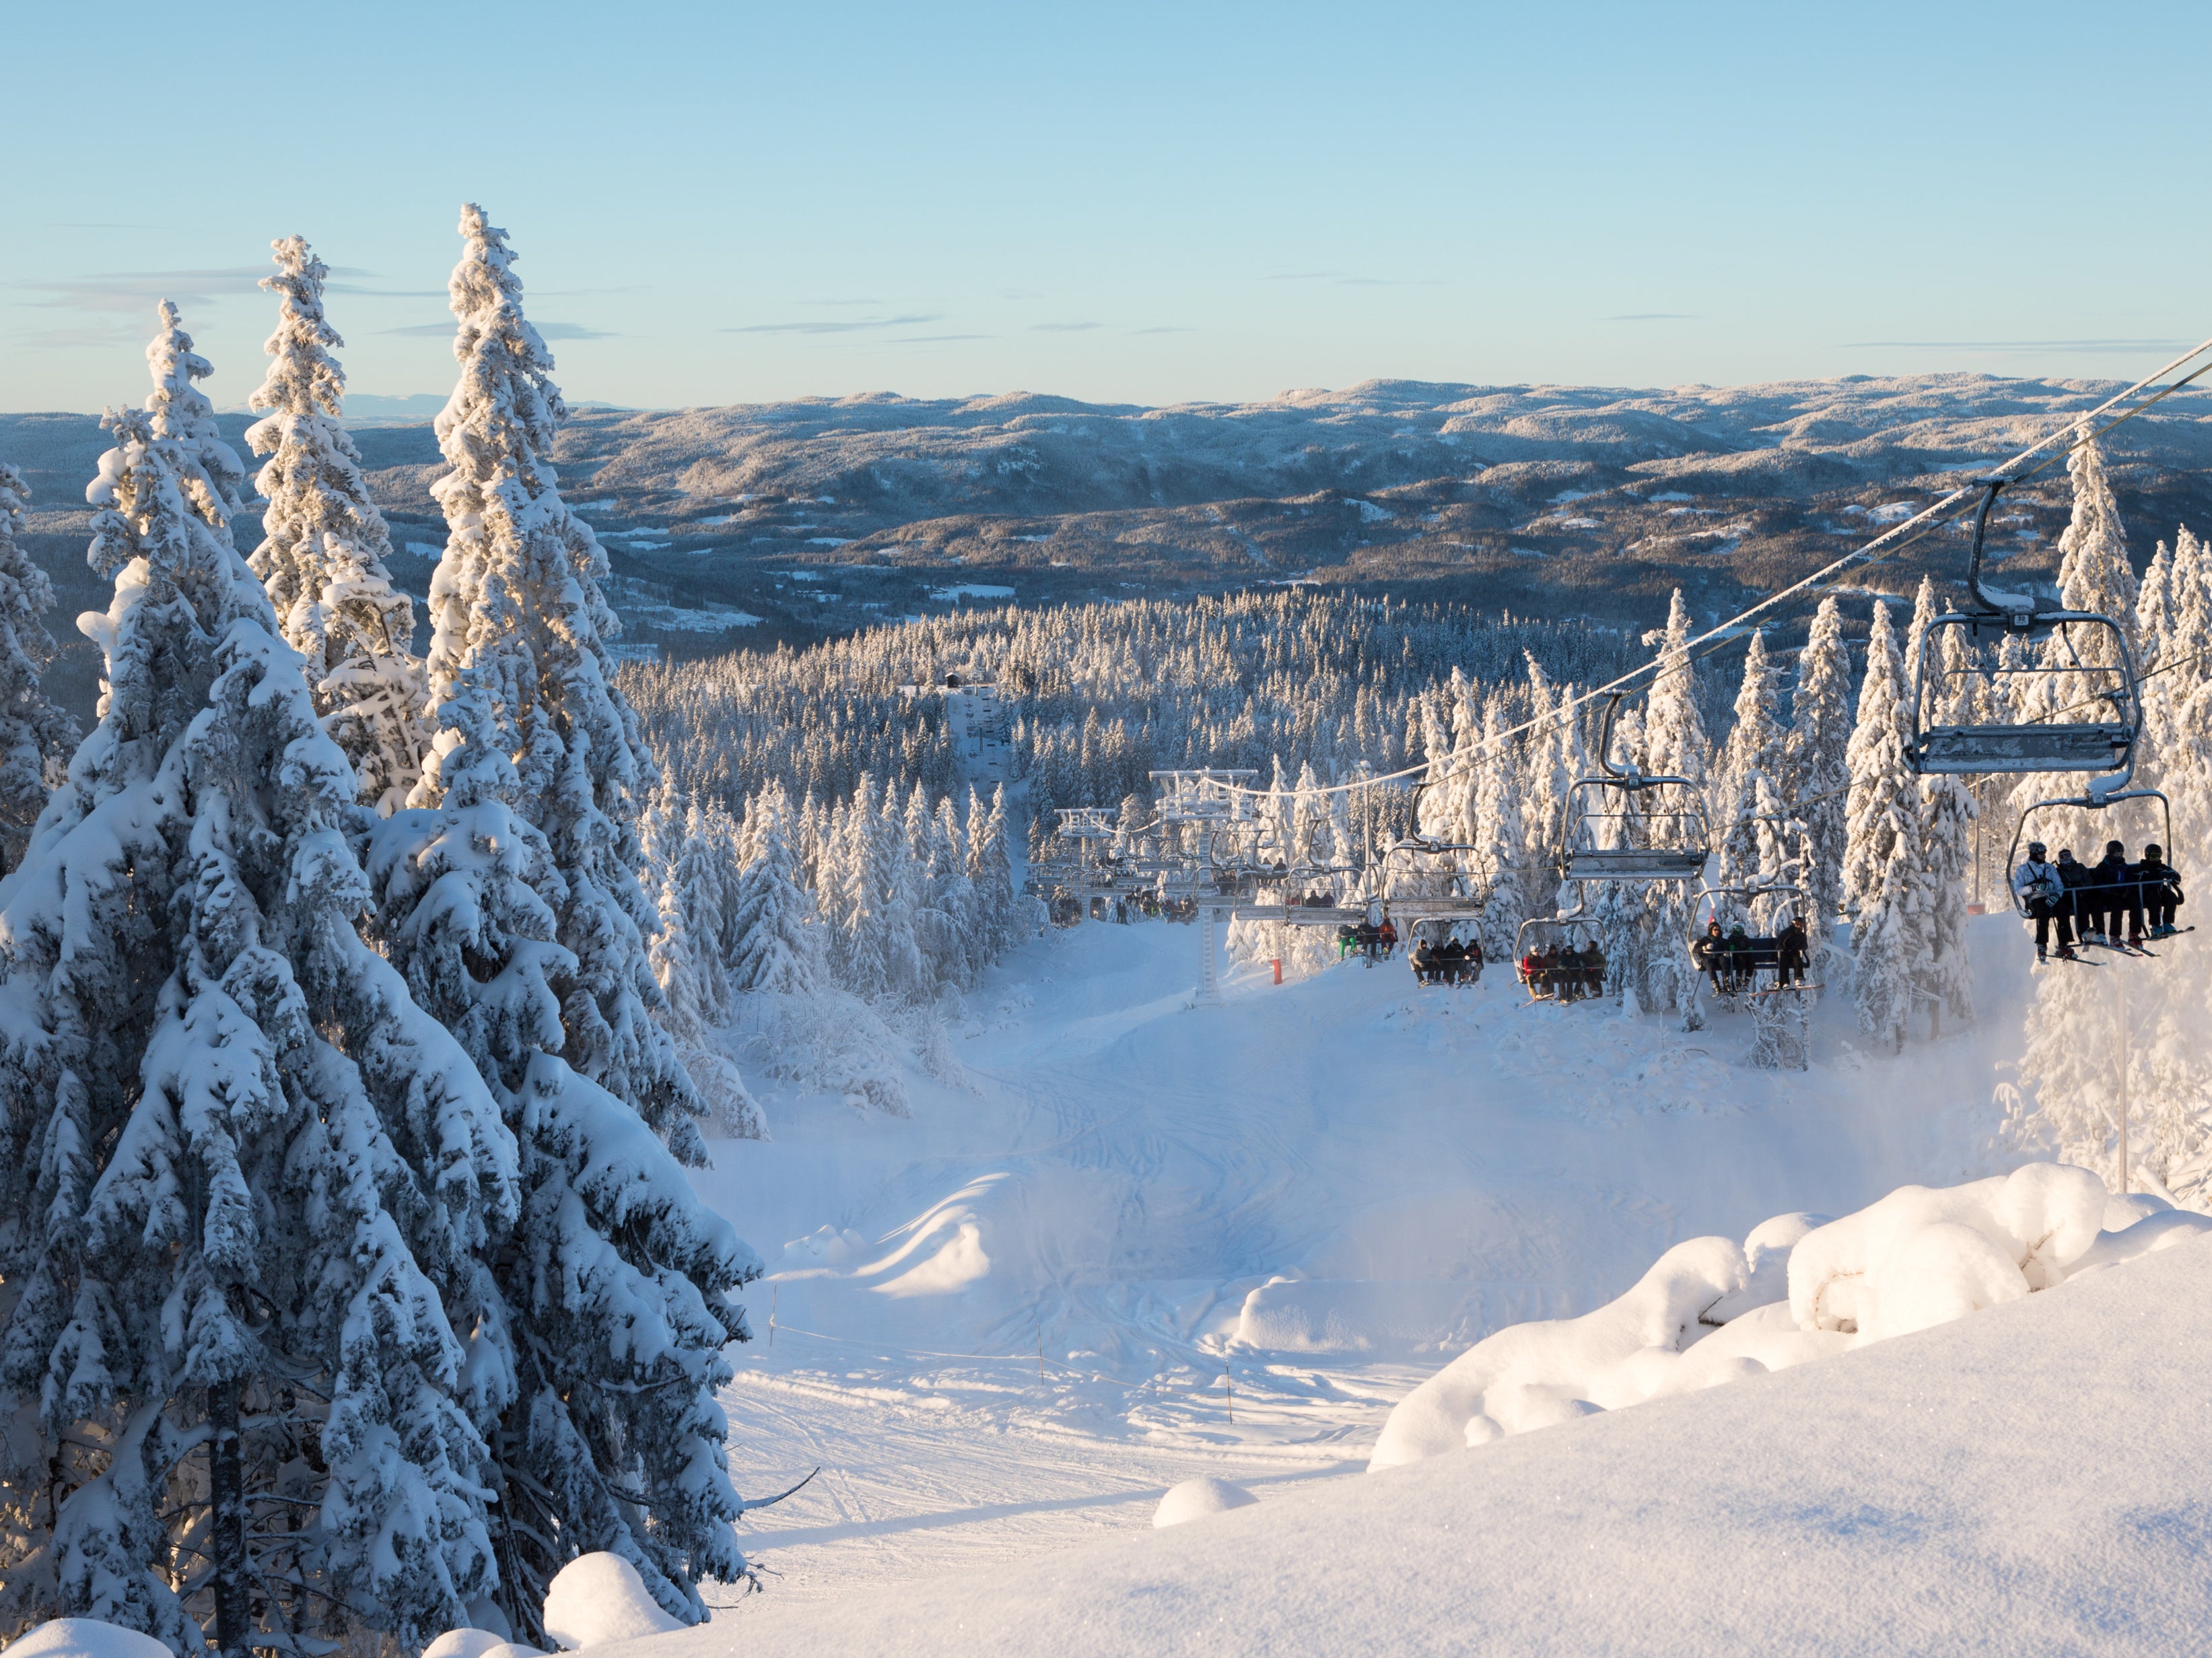 Oslo Winter Park is home to a range of ski resorts